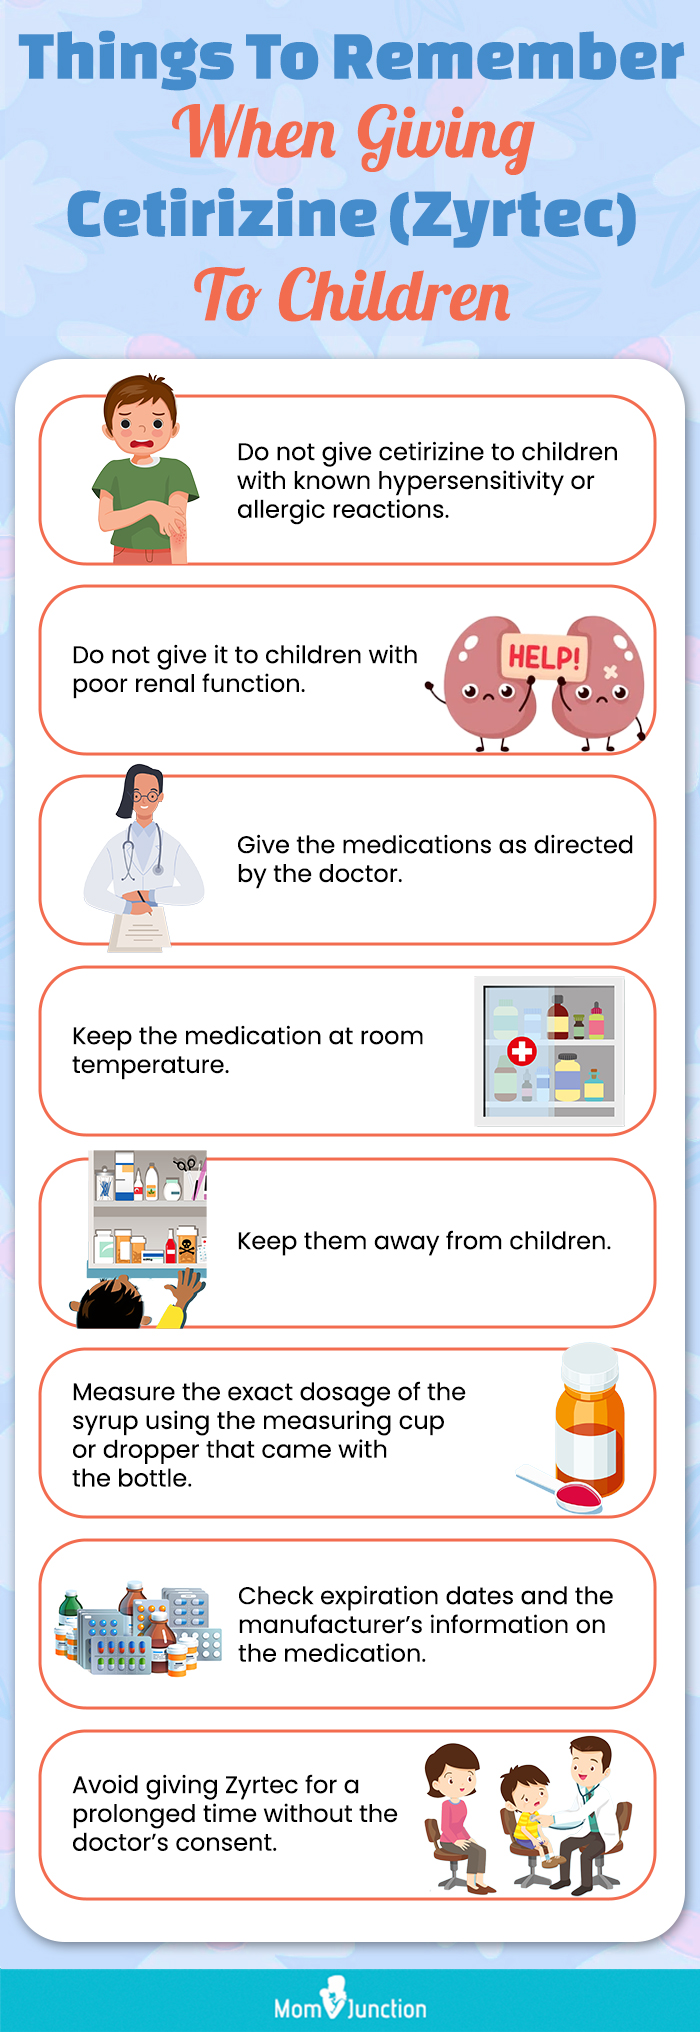 things to remember when giving cetirizine (zyrtec) to children (infographic)